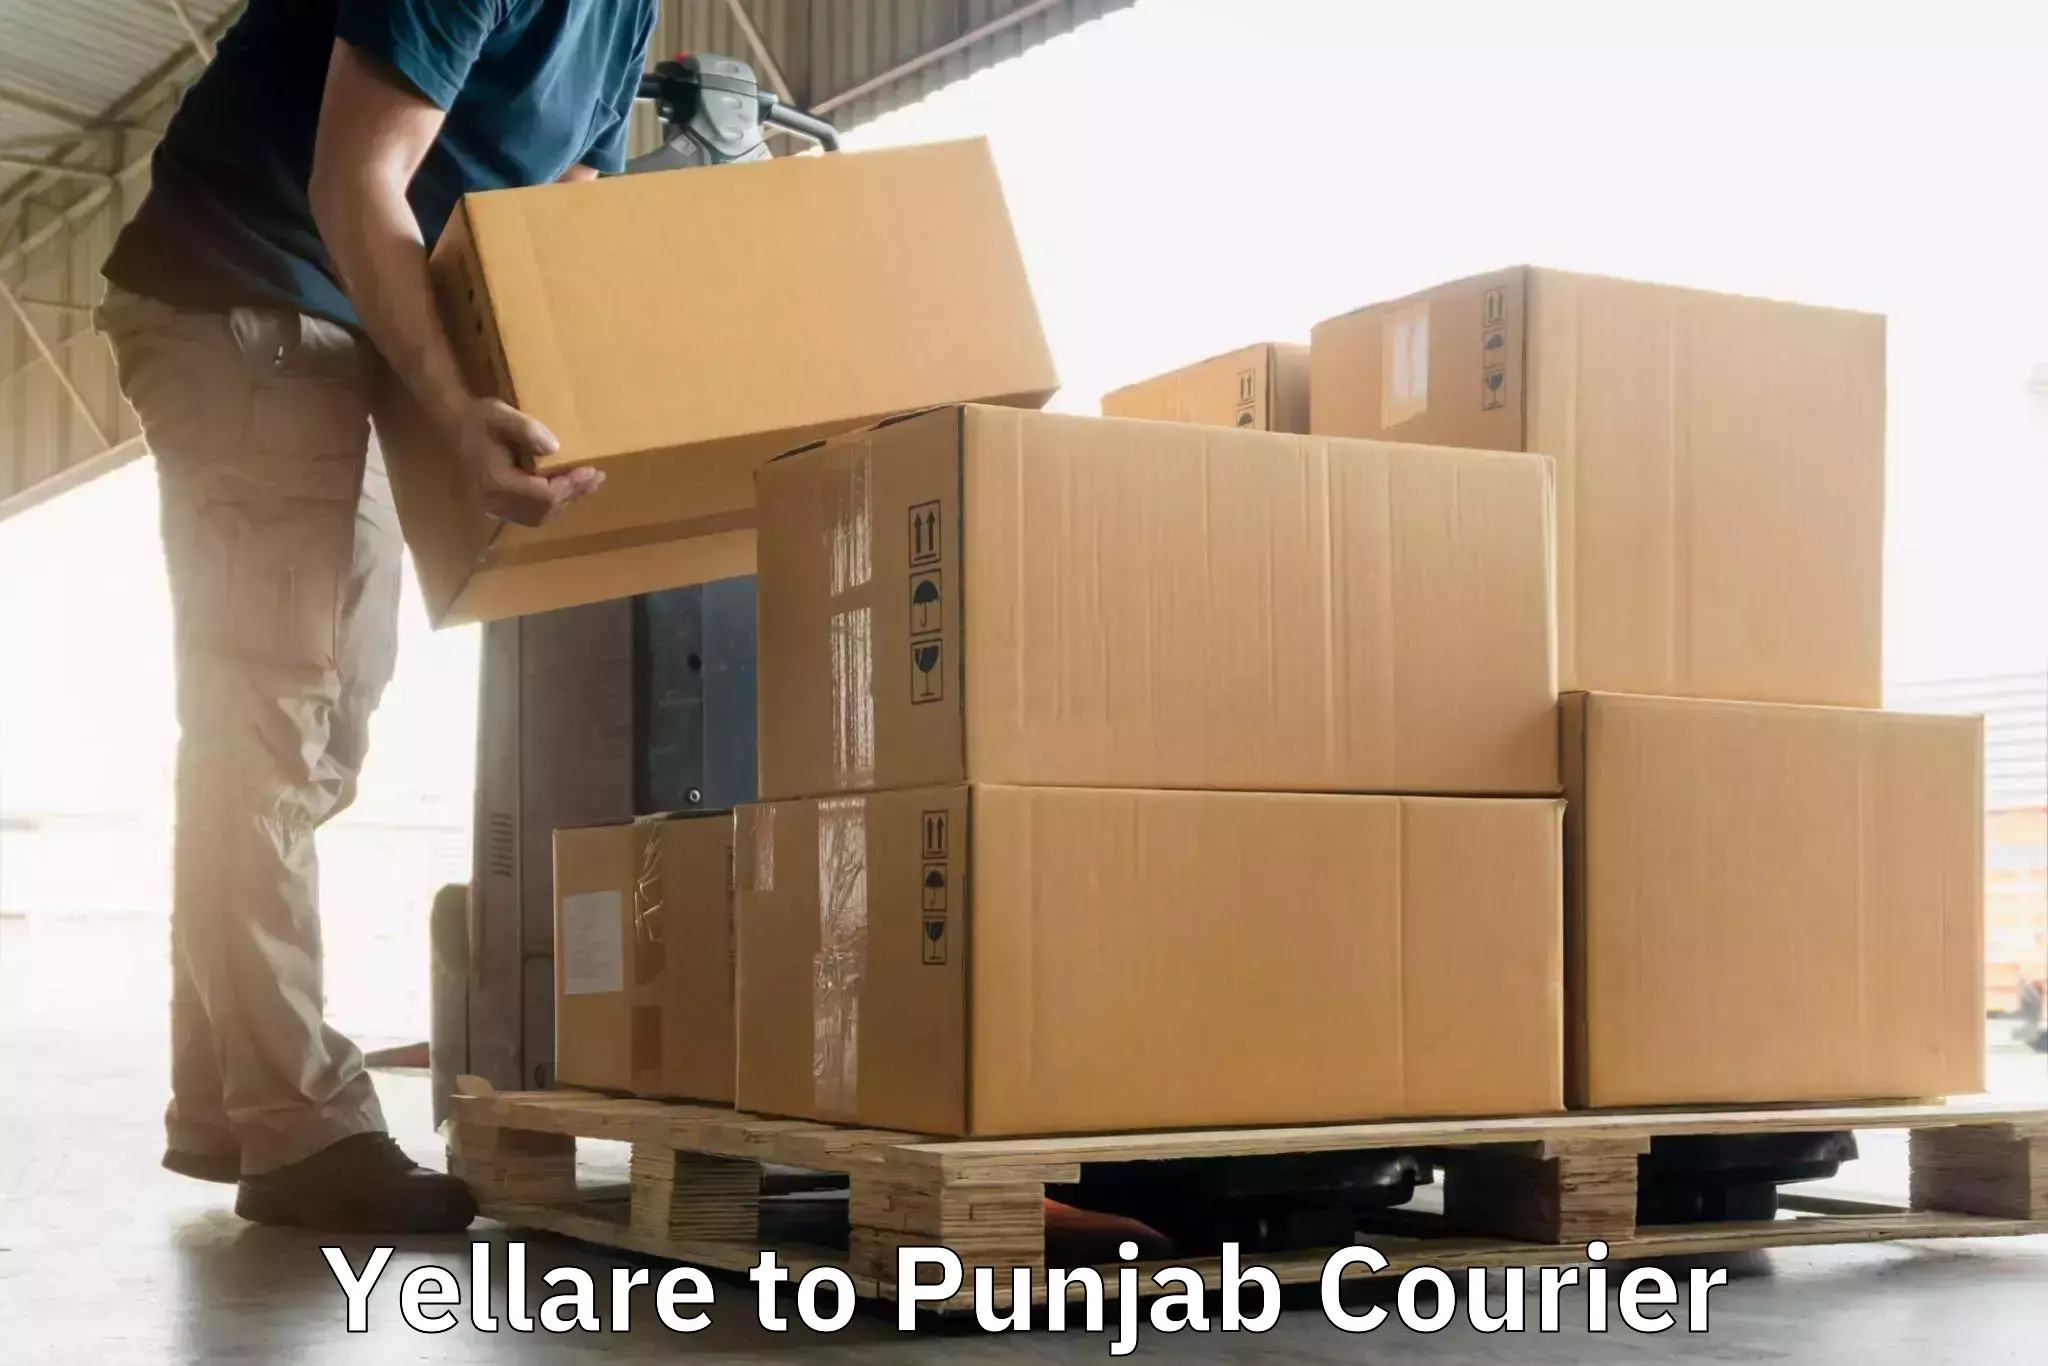 24-hour courier service in Yellare to Firozpur